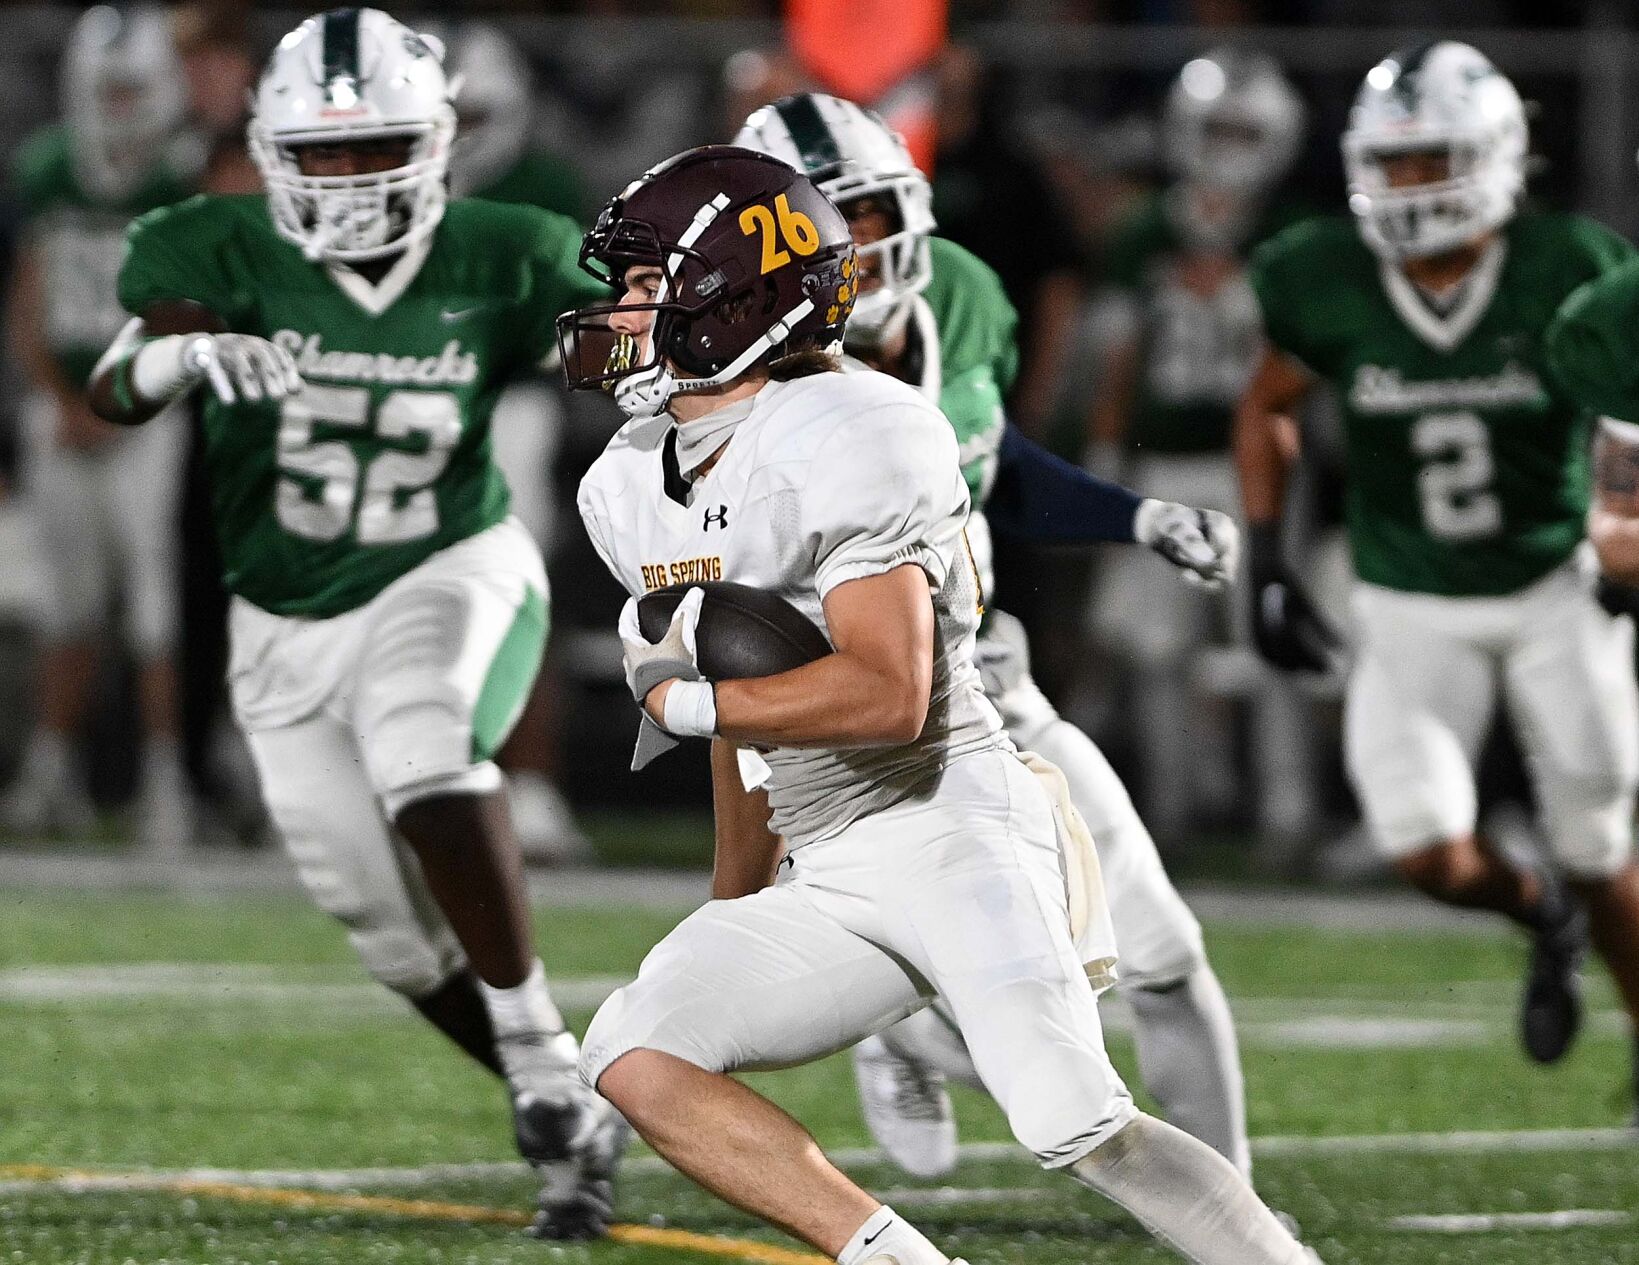 Week 7 High School Football Matchups: Key Players, Storylines, and Historical Context